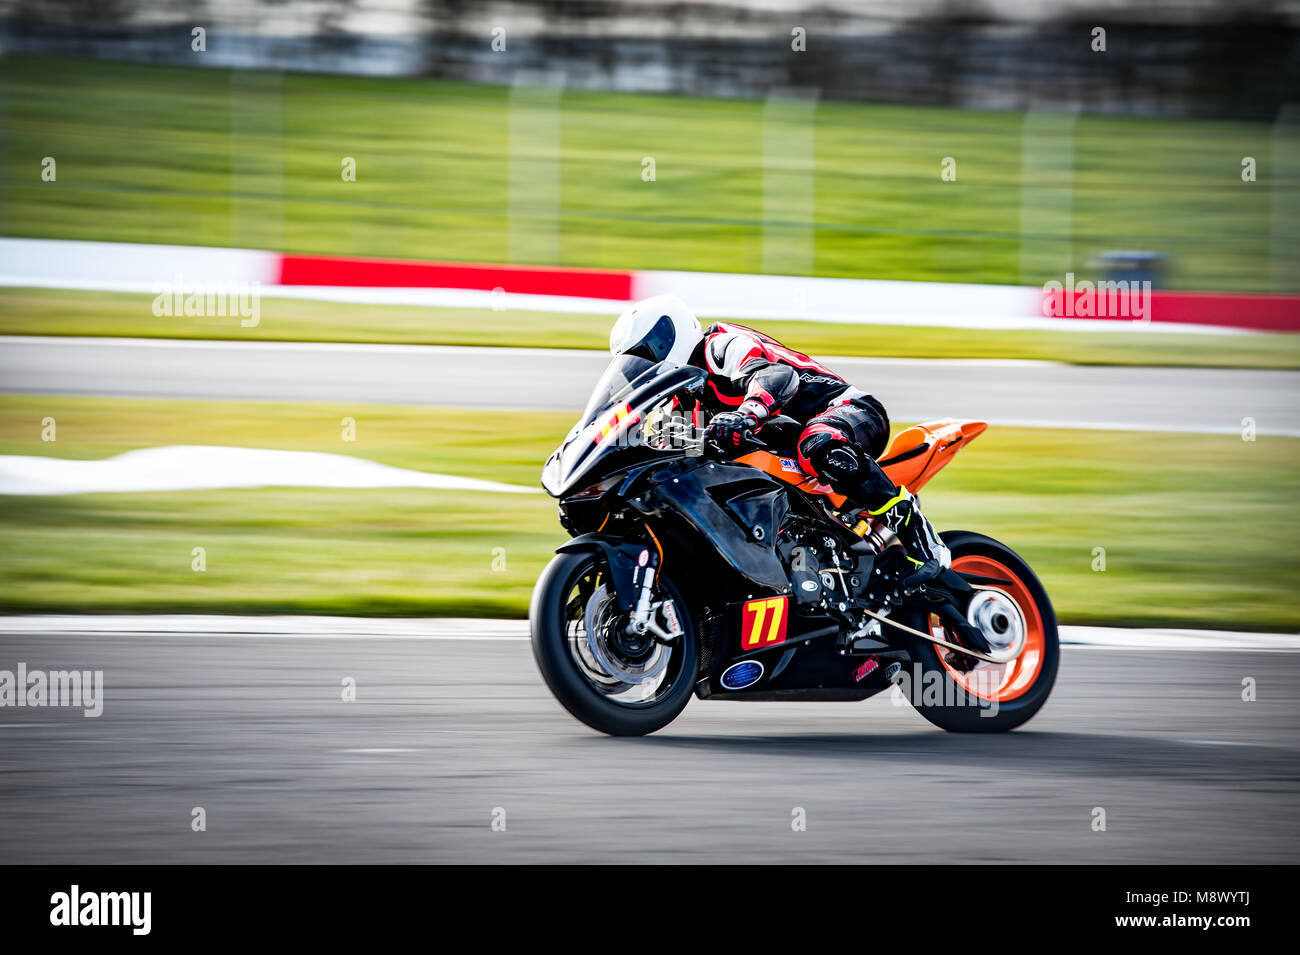 Donington Park, UK. 20th Mar, 2018. BSB testing today at Donington Park, despite the cold weather the riders managed to get out on track for testing prior to the first meeting here on 31st March Credit: Best/Alamy Live News Stock Photo